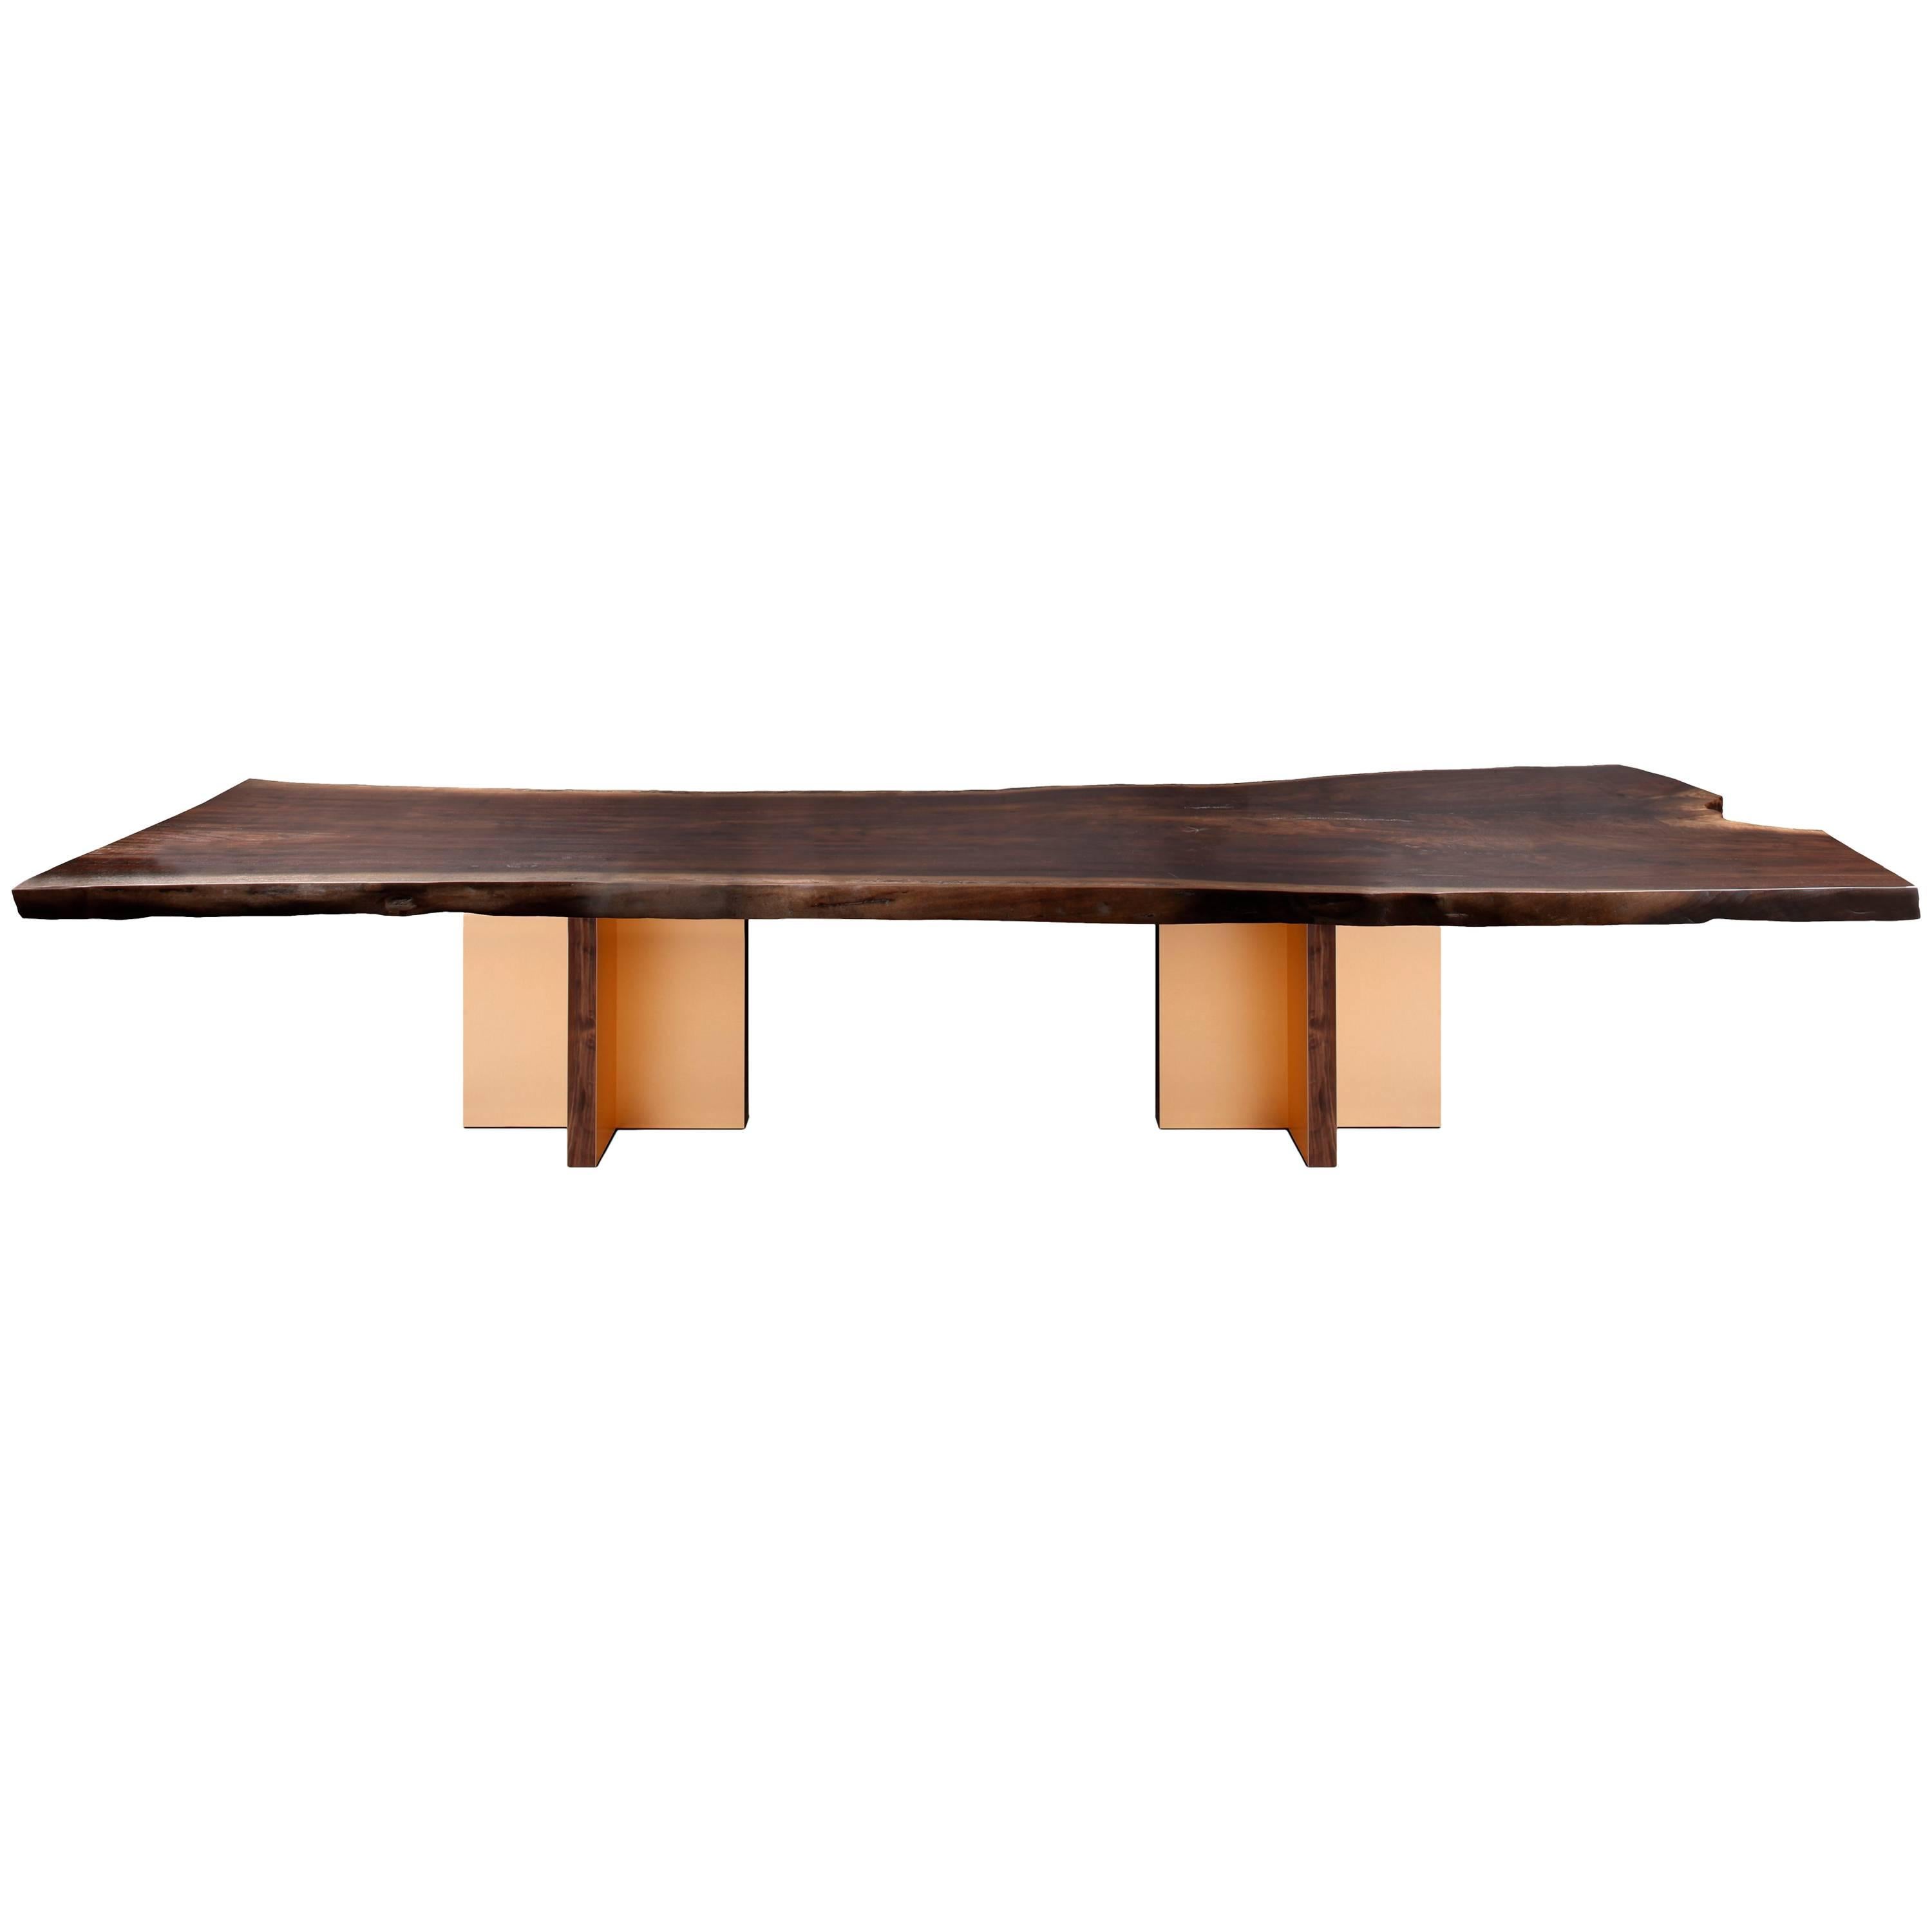 "Monarch" Extra Large Slab Dining Table by Studio Roeper